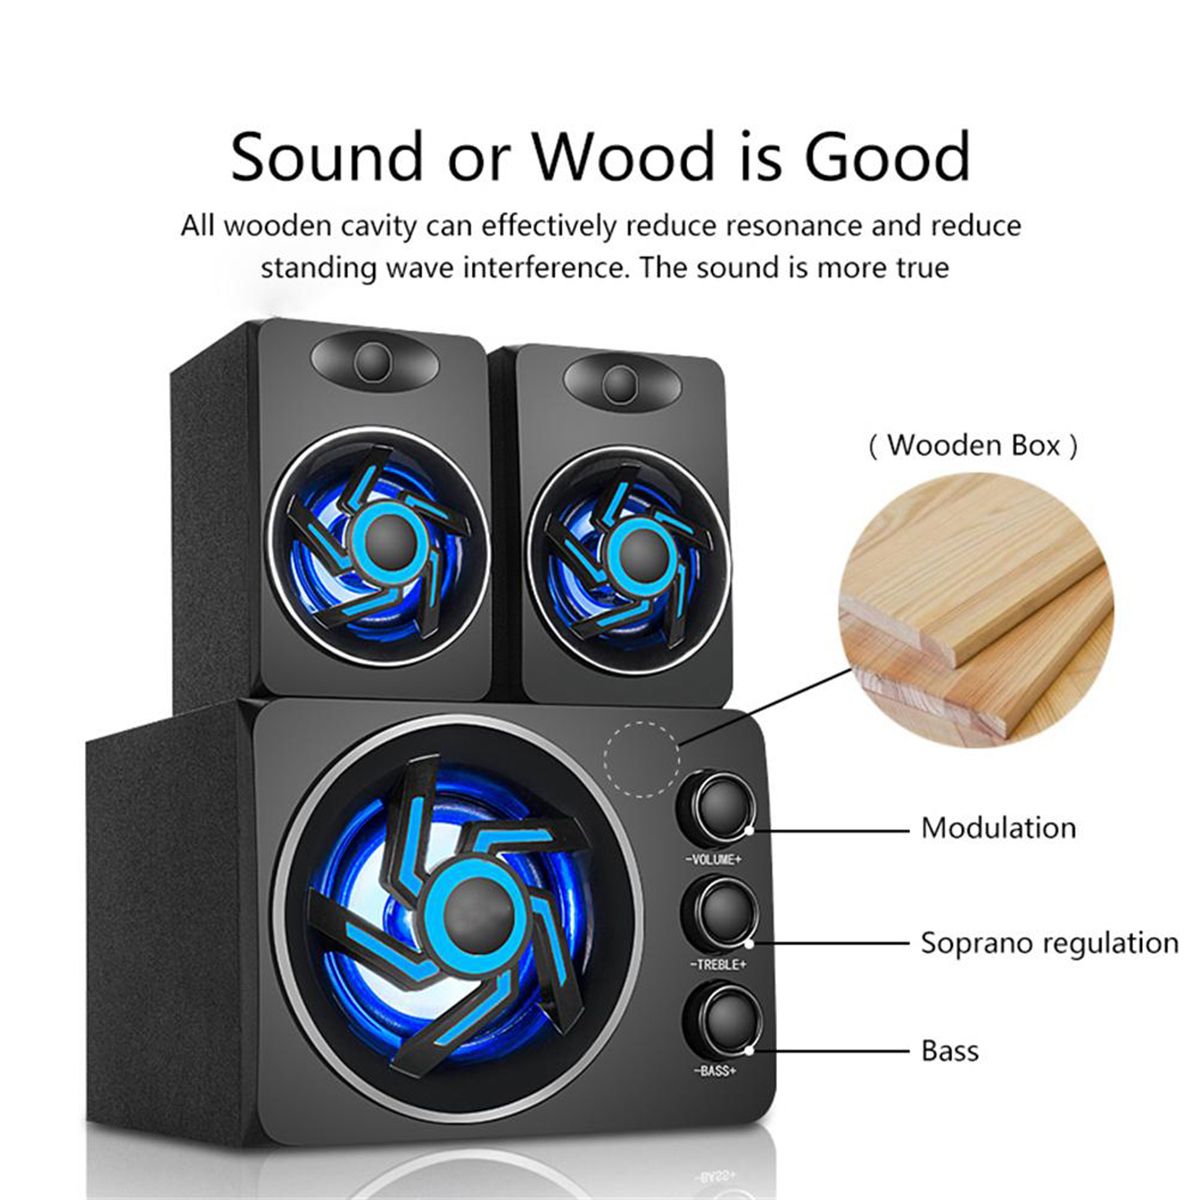 21-Computer-bluetooth-Speaker-Wooden-Bass-TF-Card-U-Disk-LED-Light-Wired-Speakers-1559048